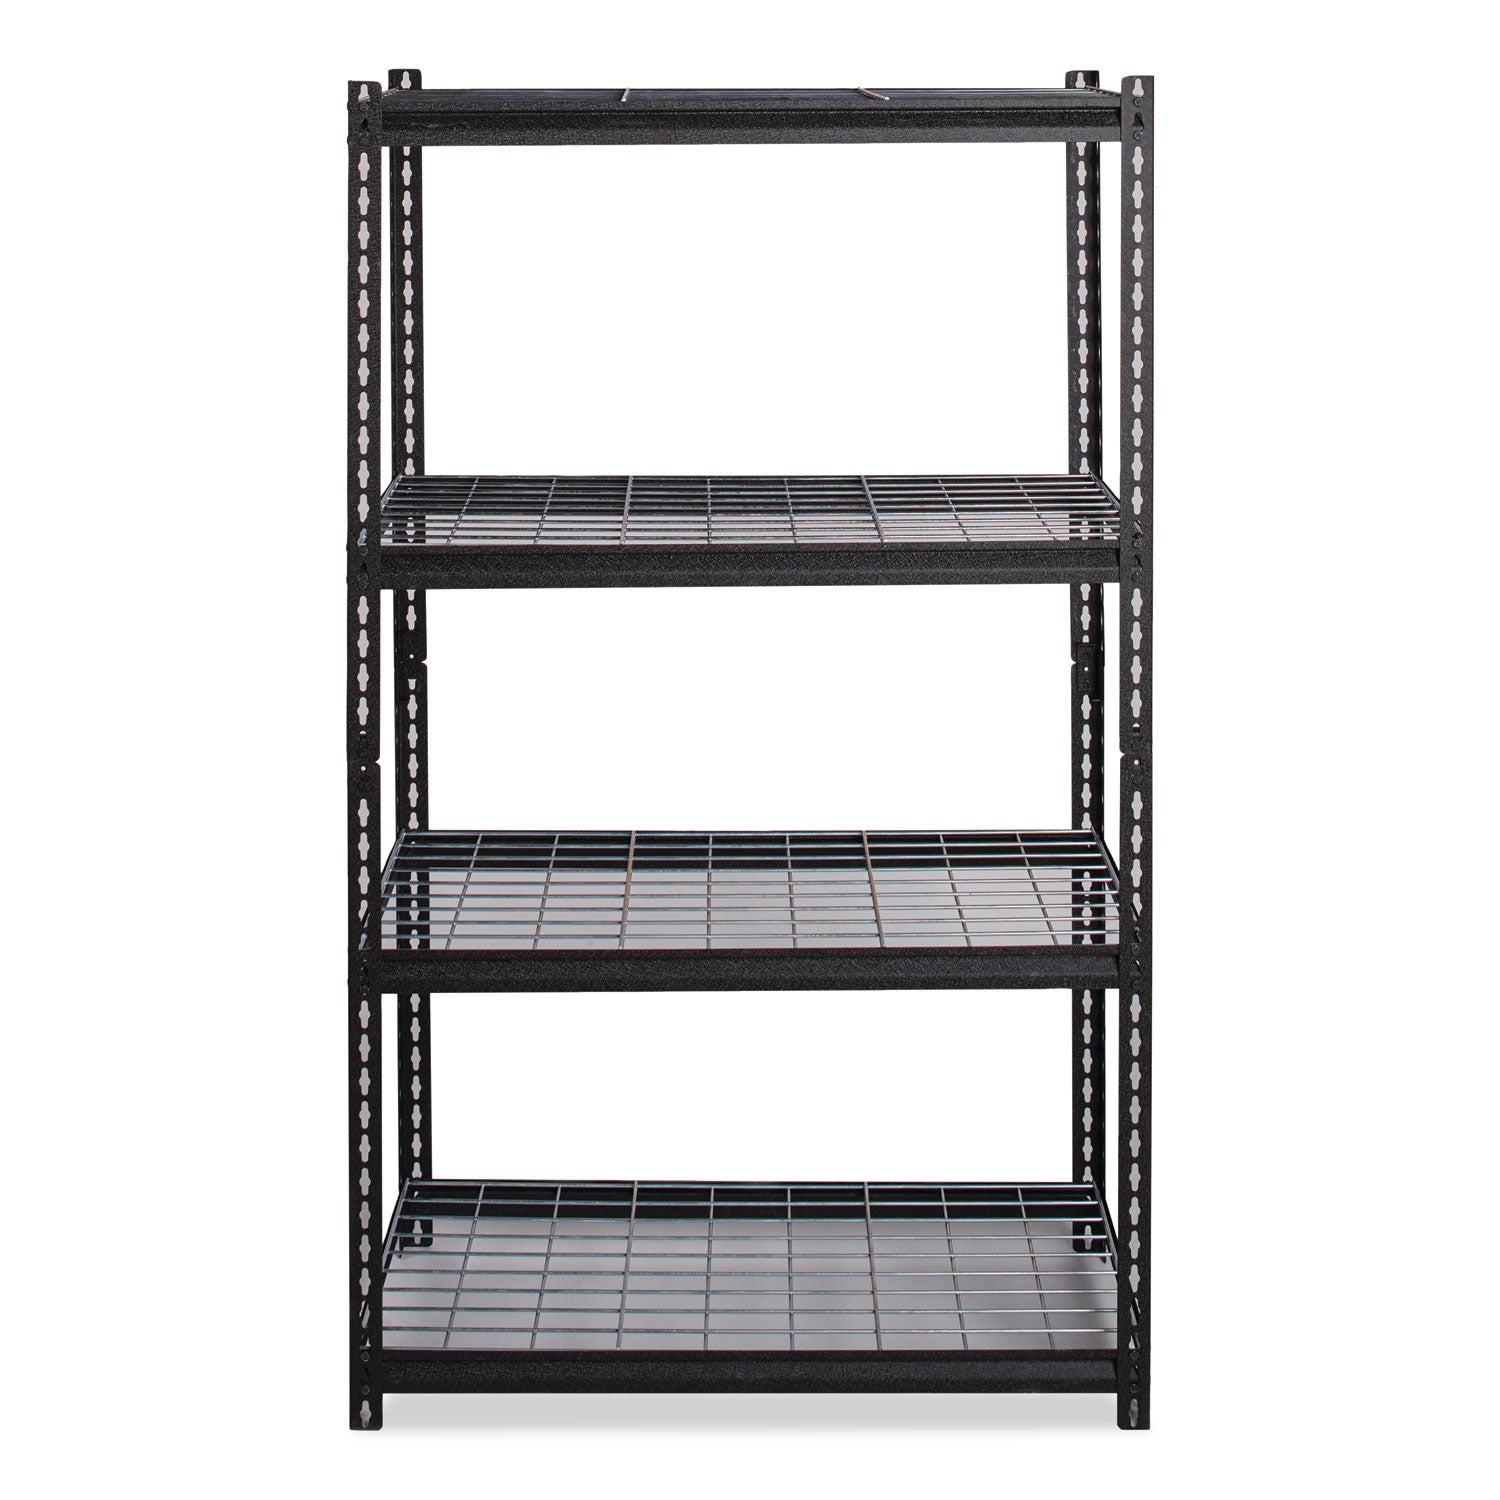 iron-horse-2300-wire-deck-shelving-four-shelf-36w-x-18d-x-60h-black-ships-in-4-6-business-days_hid22129 - 2